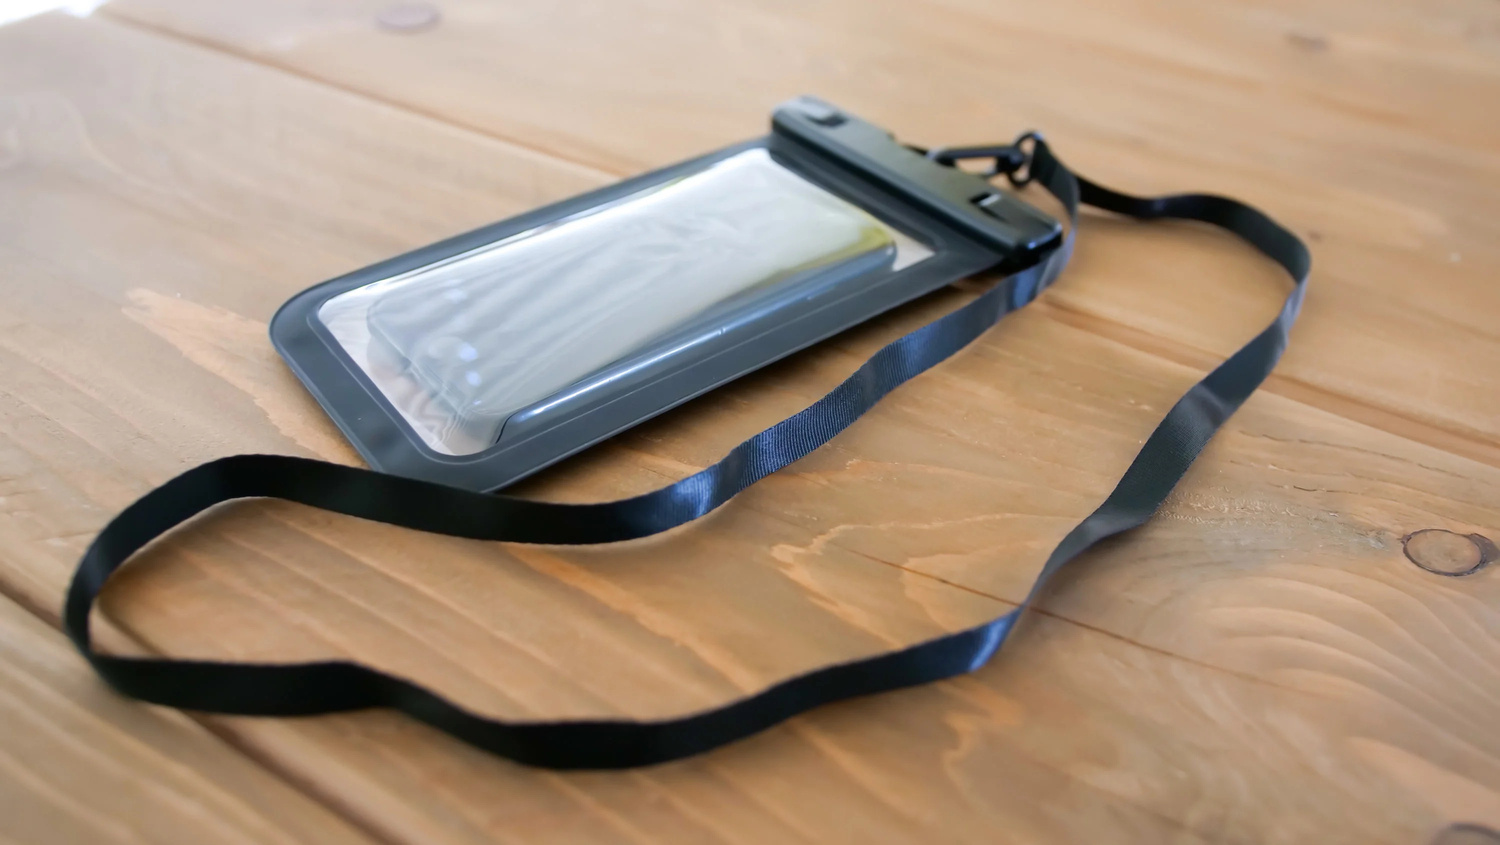 securing-your-waterproof-phone-bag-attaching-a-lanyard